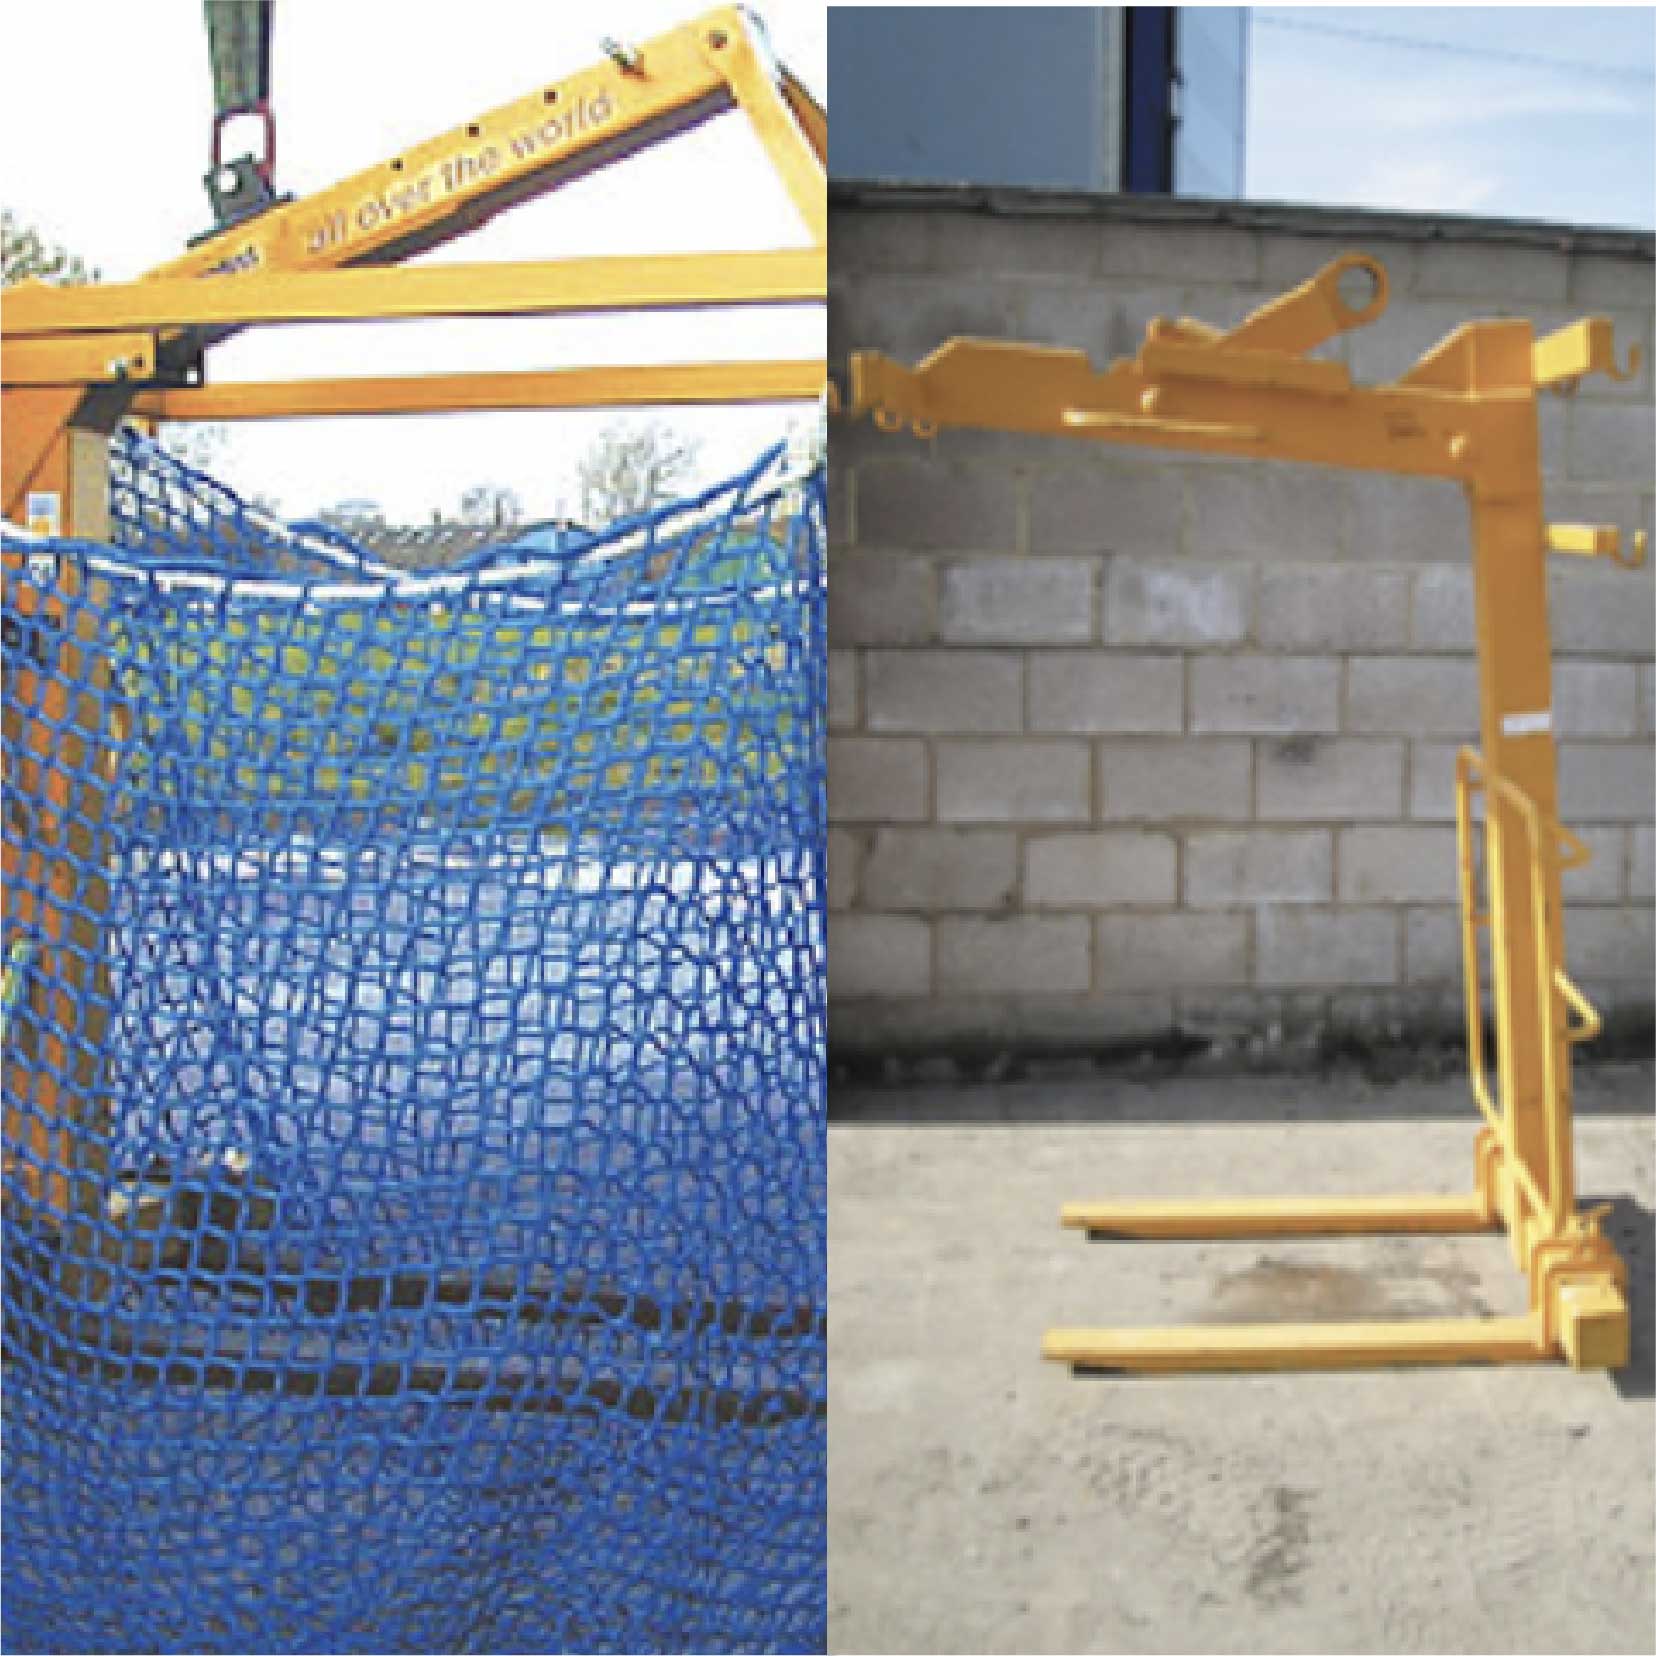 crane forks and safety nets